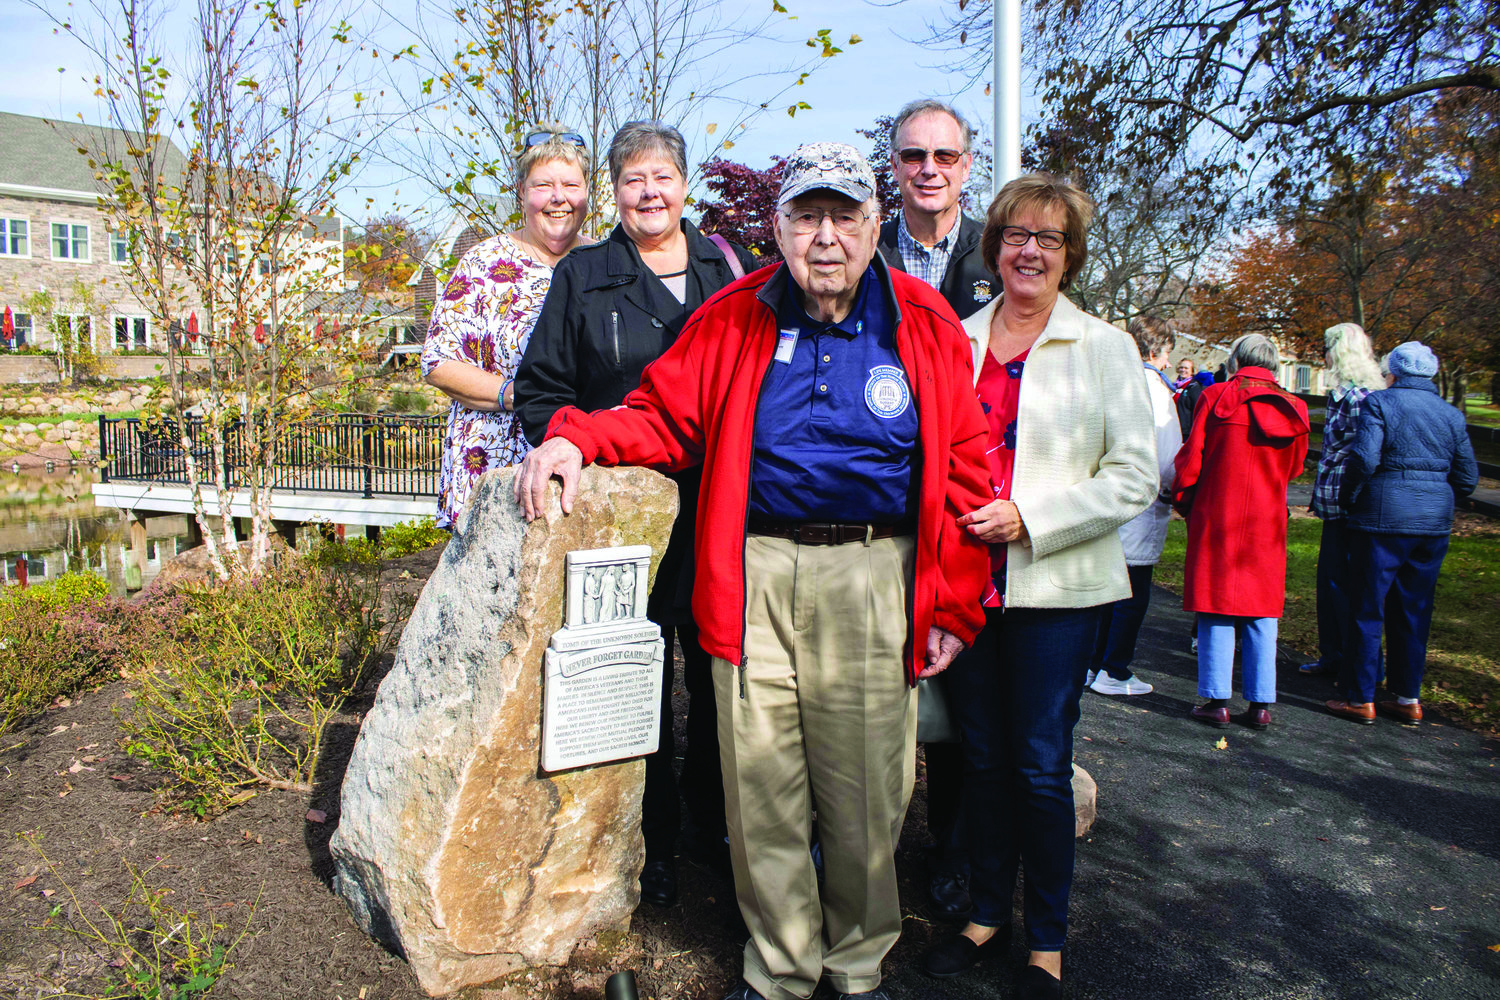 Tom Barnett, veteran and resident of Pine Run Retirement Community in Doylestown Township, stands in the Never Forget Garden with his family.